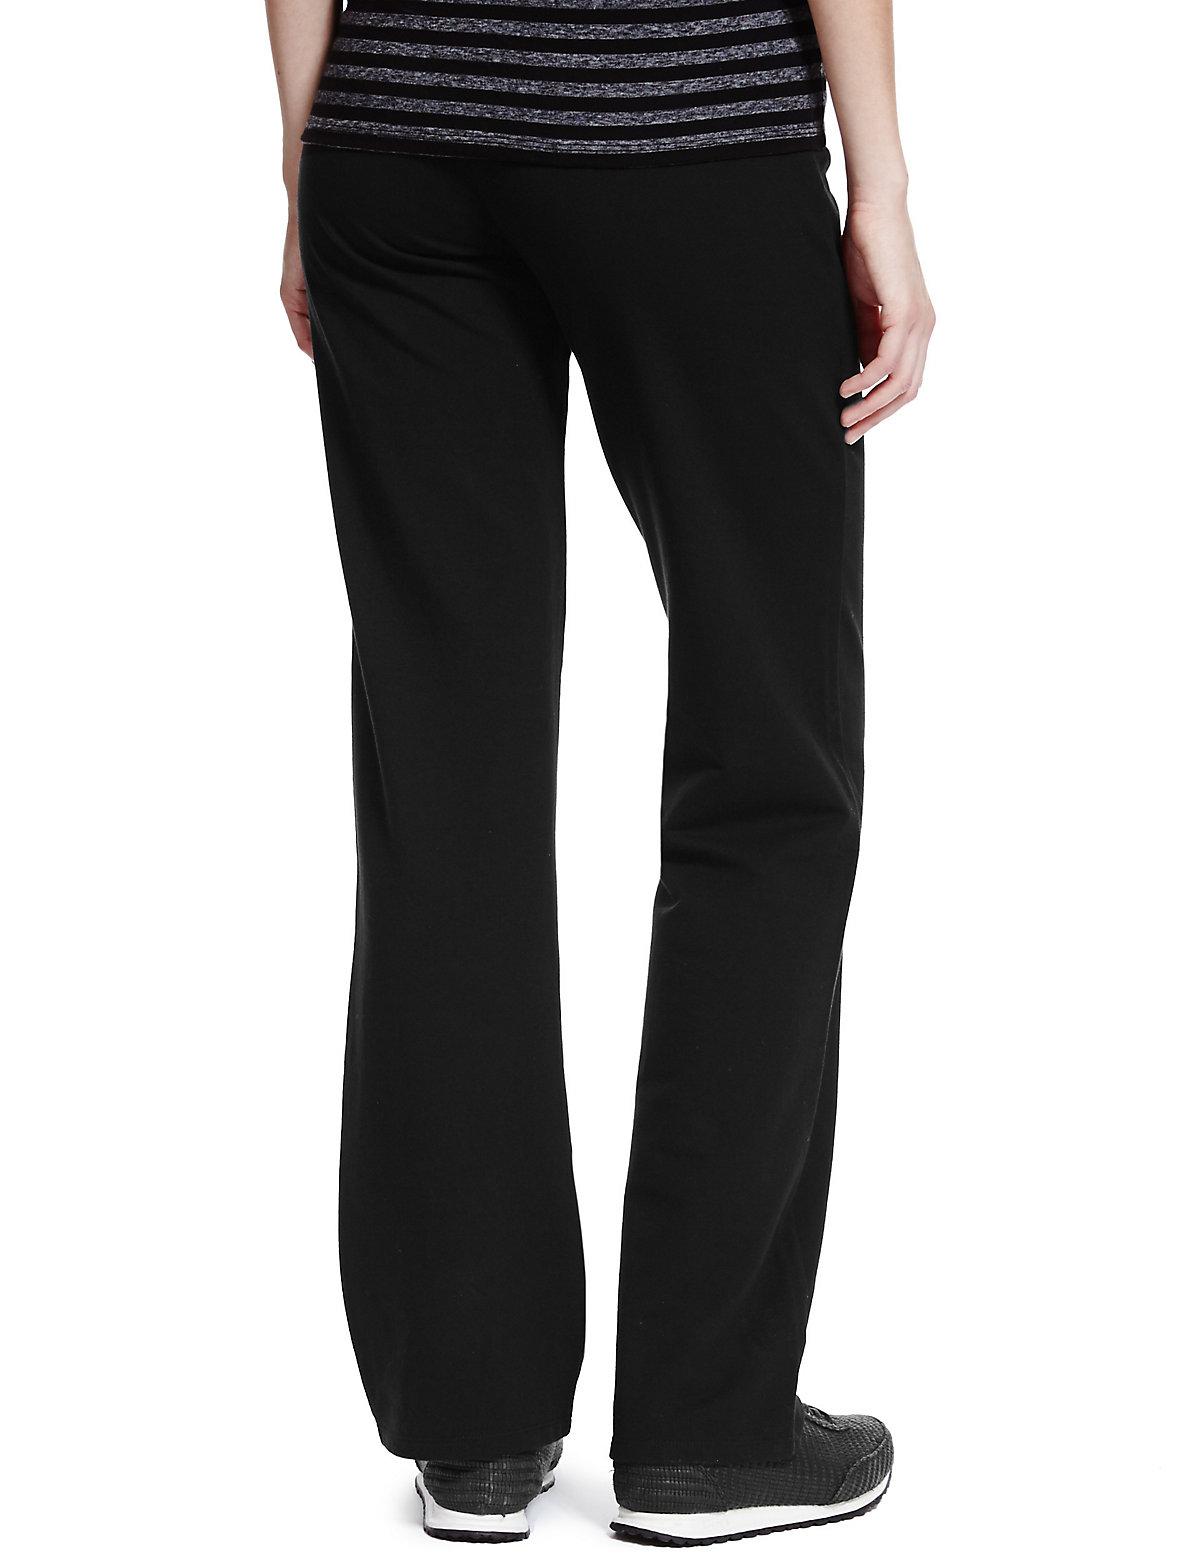 Marks and Spencer - - M&5 BLACK Cotton Rich Straight Leg Joggers - Size ...